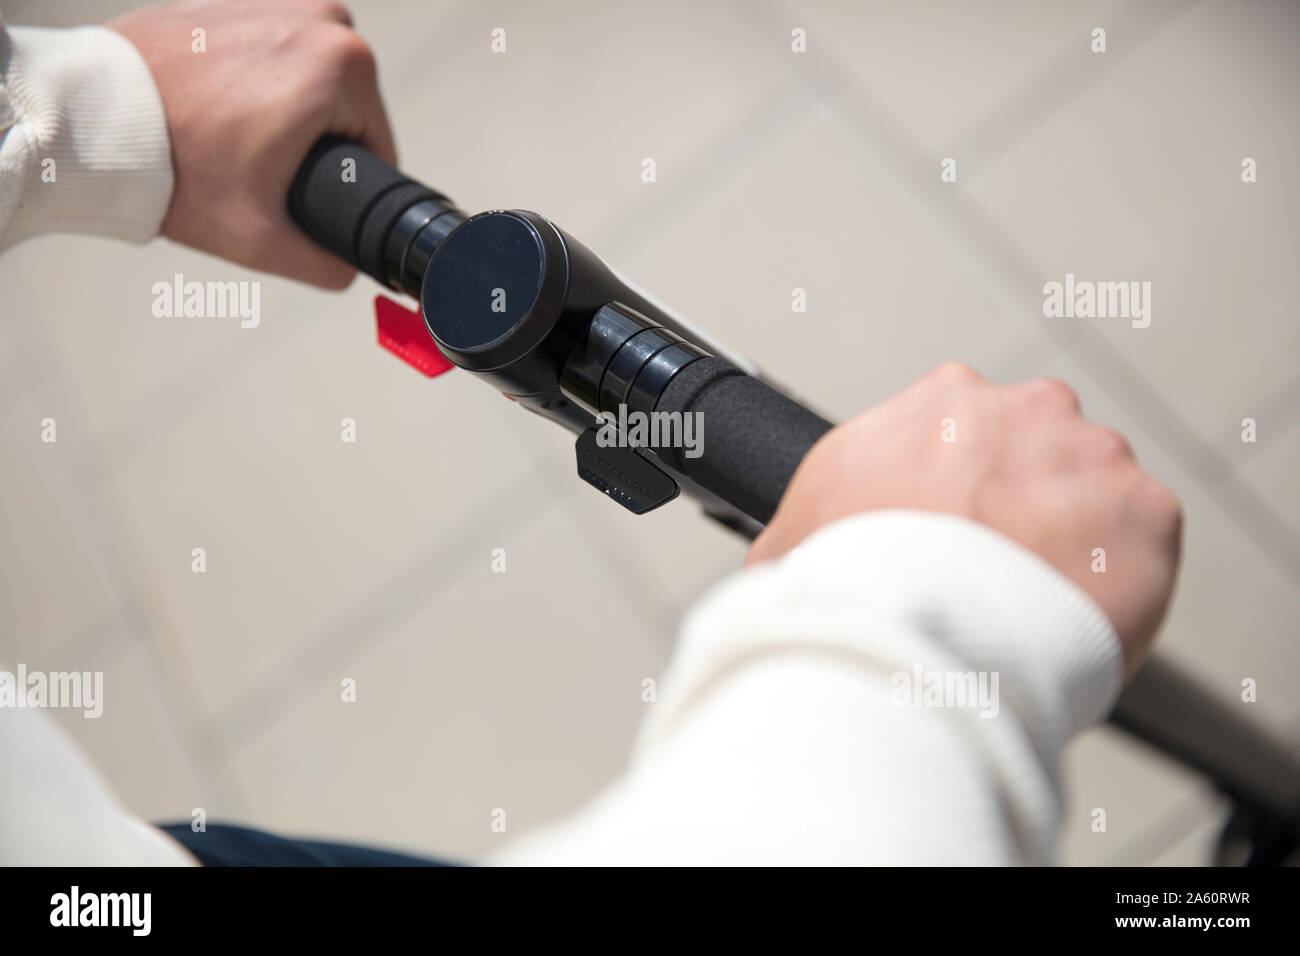 Close-up of hands on handlebar of an e-scooter Stock Photo